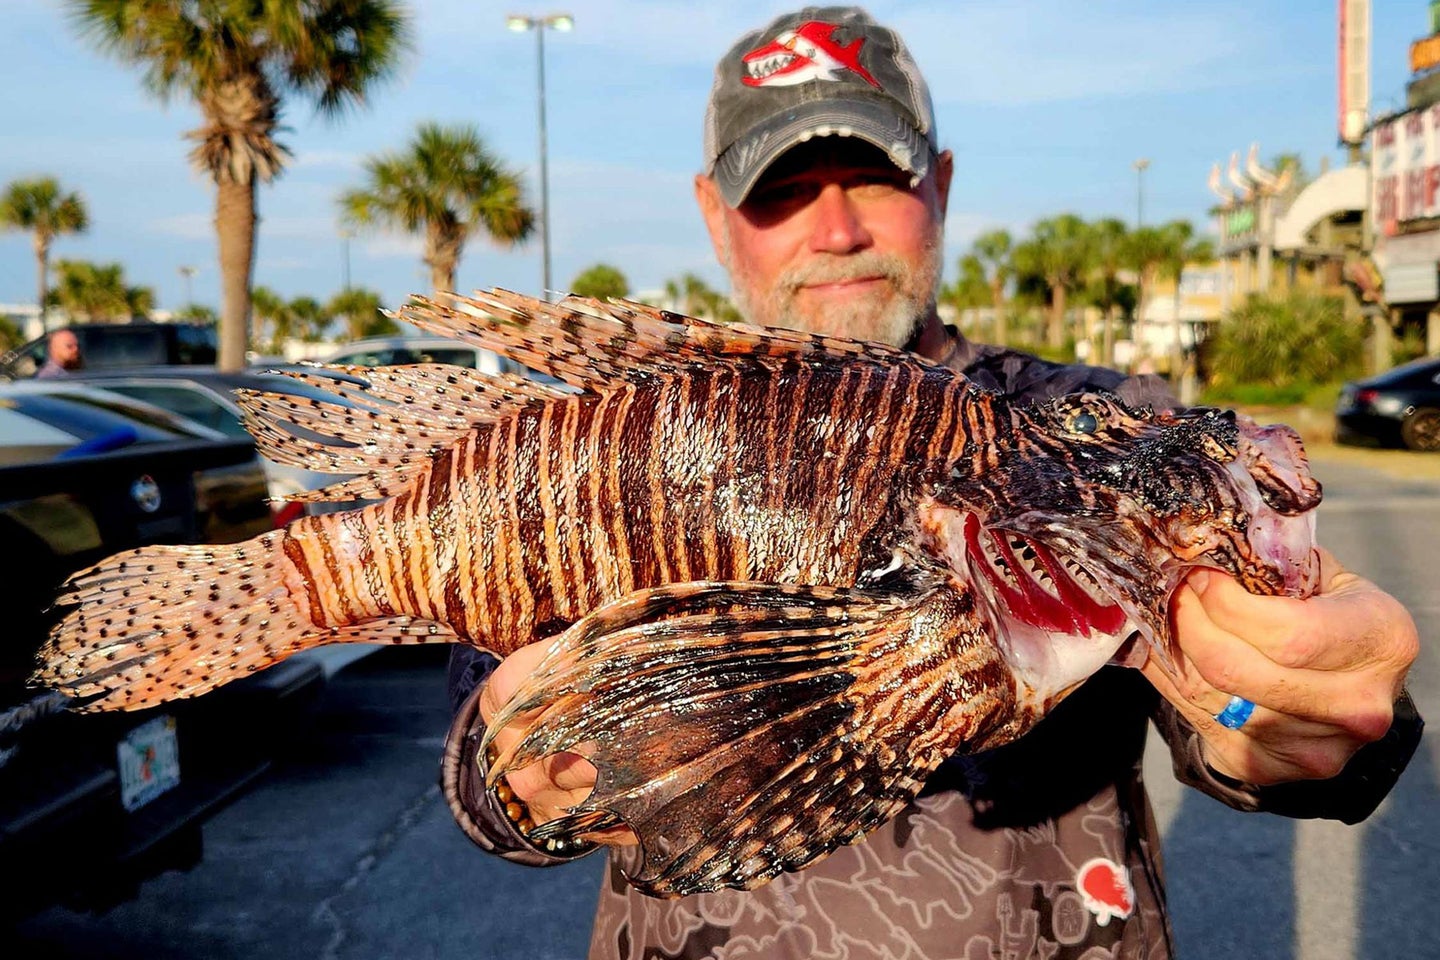 A lionfish caught during a tournament in Florida.